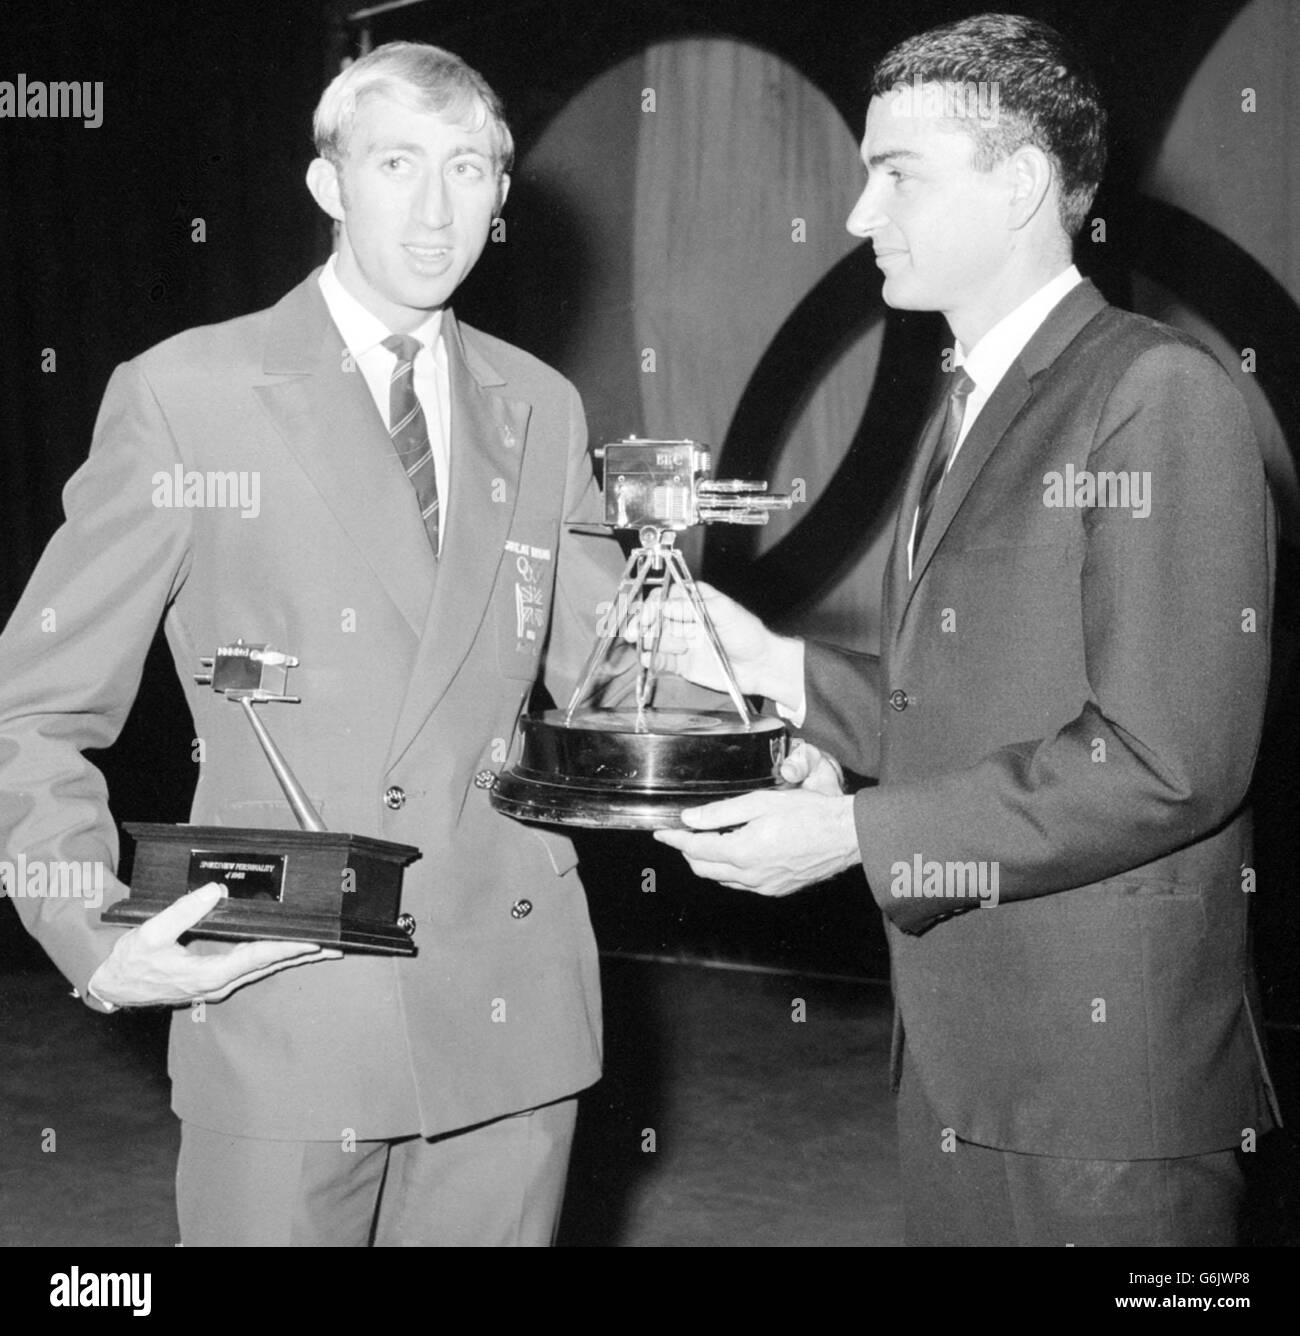 David Hemery Wins BBC Sports Award. Australian runner Ron Clarke (RIGHT) presenting the BBC's Sportsview Personality of the Year 1968 Award to Olympic gold medalist David Hemery at the BBC Television Theatre, Golders Green, London. Stock Photo